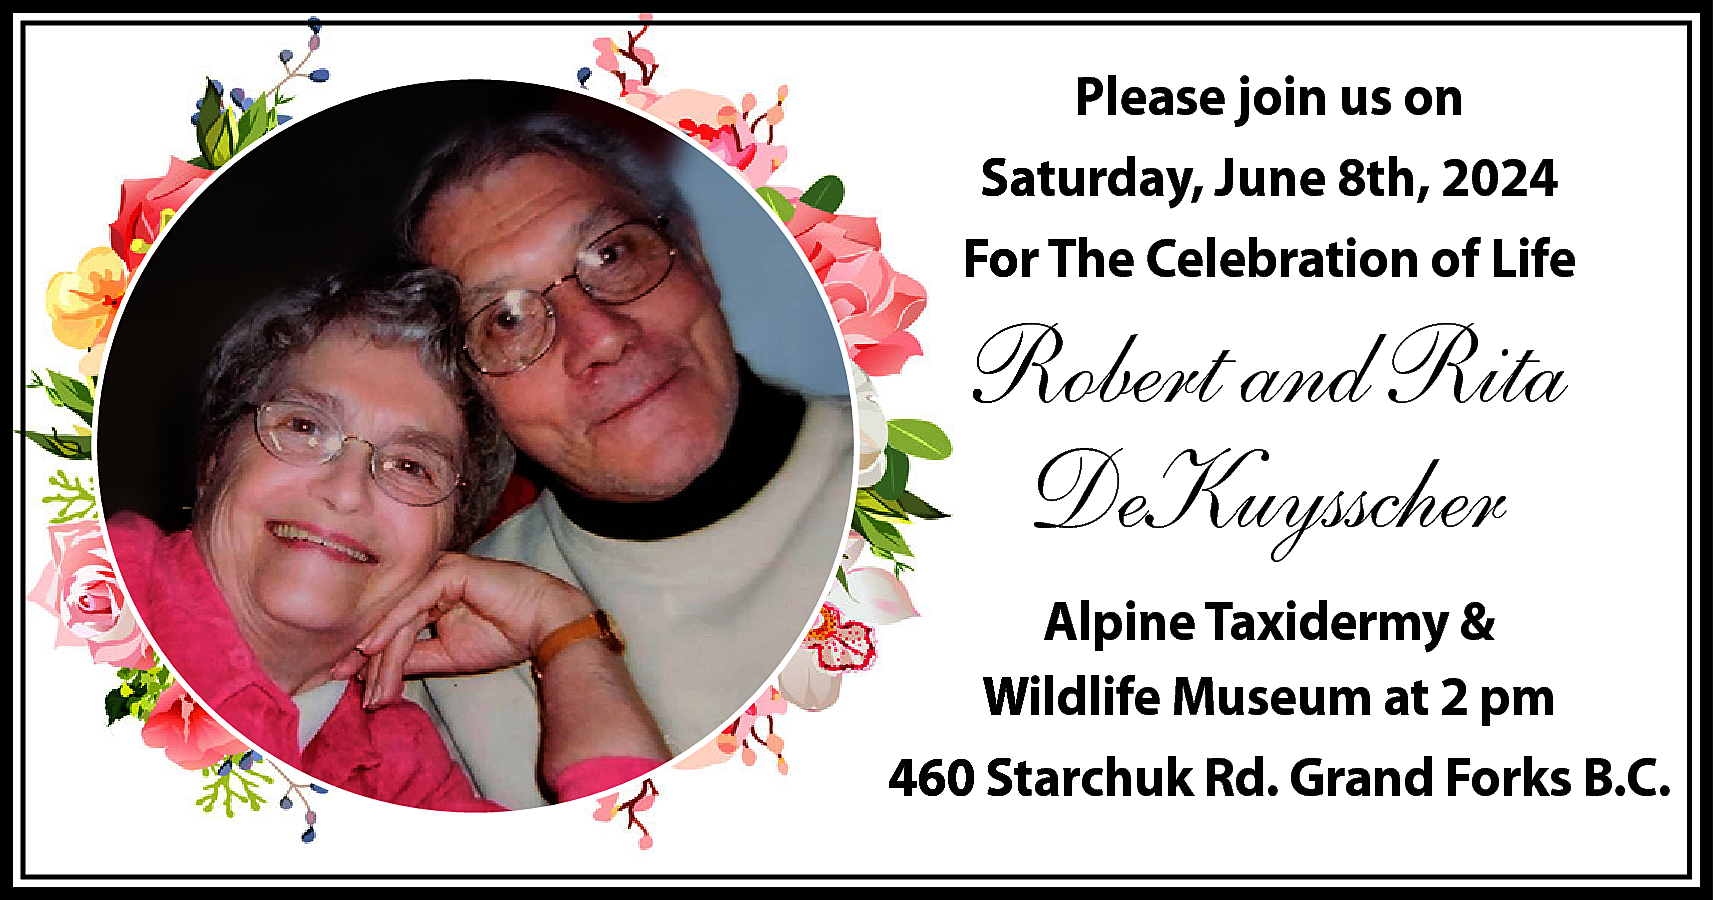 Please join us on <br>Saturday,  Please join us on  Saturday, June 8th, 2024  For The Celebration of Life    Robert and Rita  DeKuysscher  Alpine Taxidermy &  Wildlife Museum at 2 pm  460 Starchuk Rd. Grand Forks B.C.    